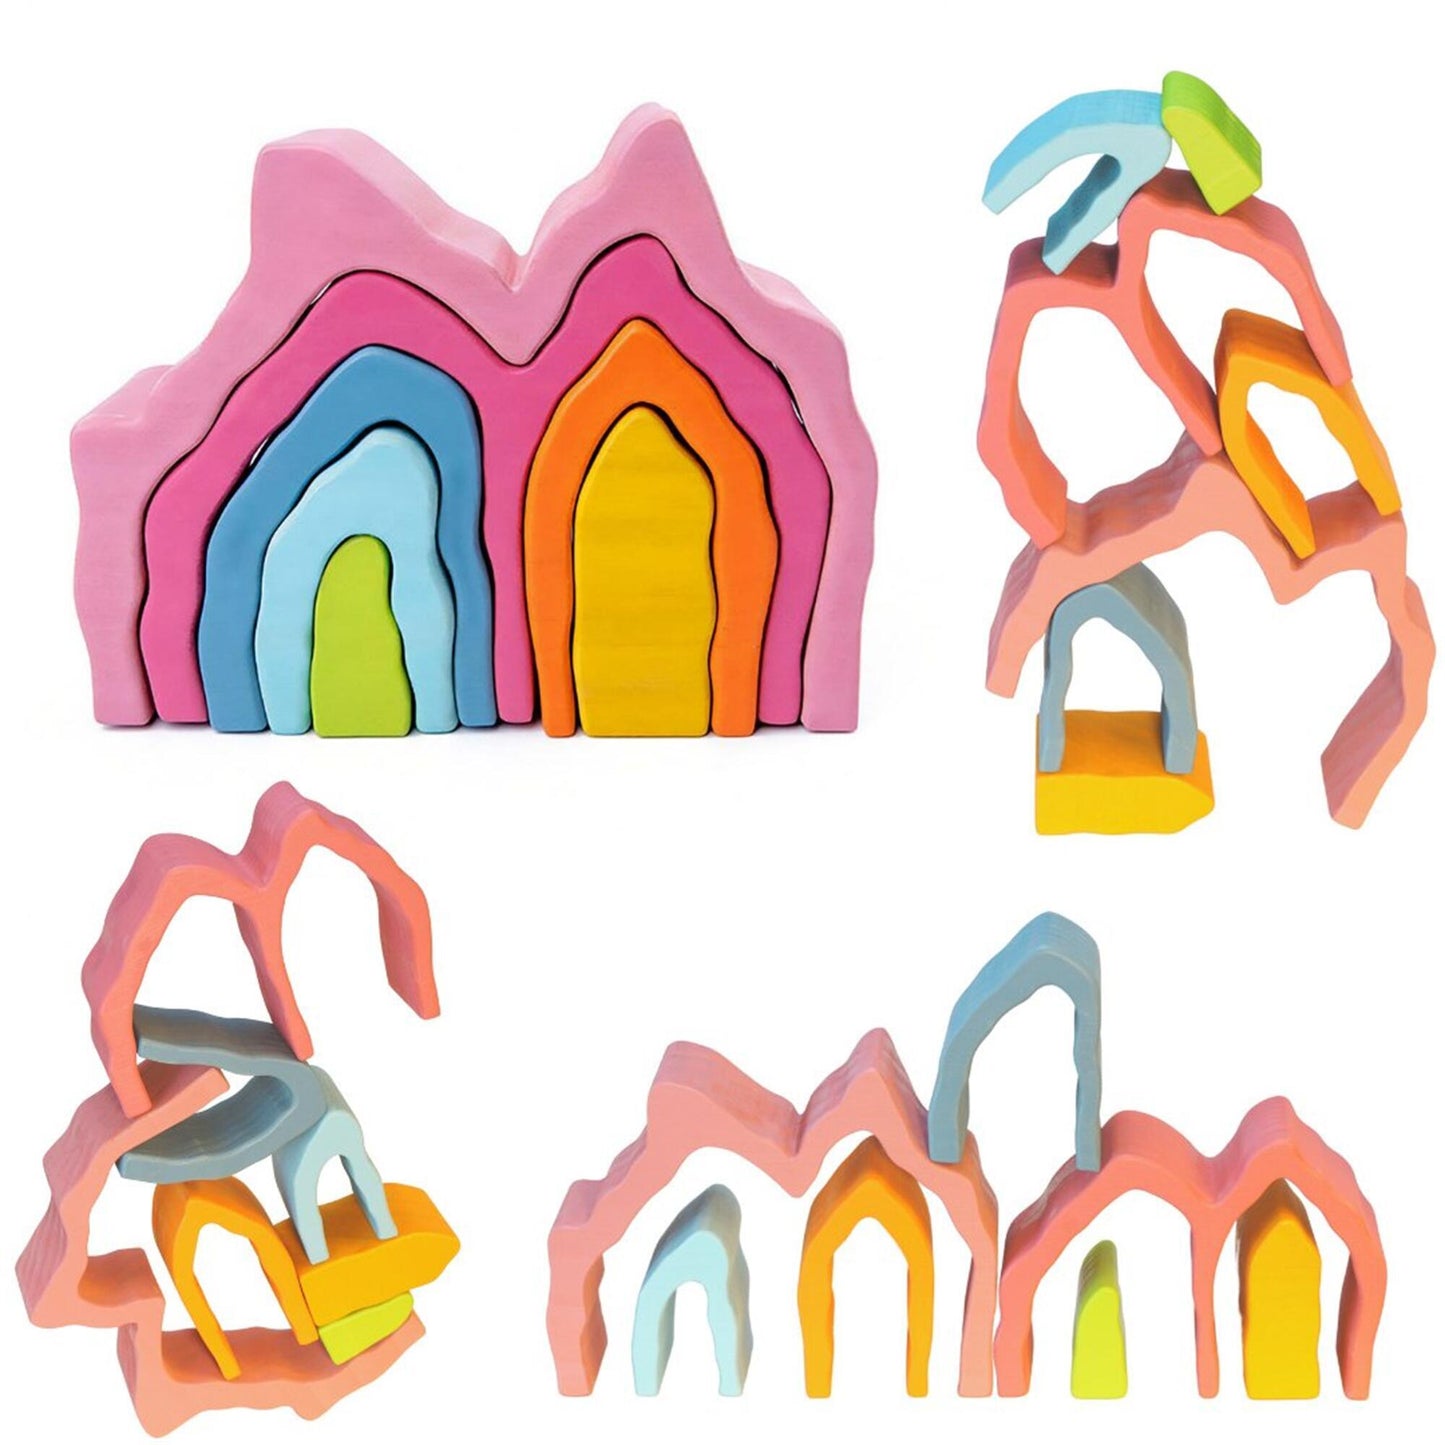 Coral Wooden Stacking Toy